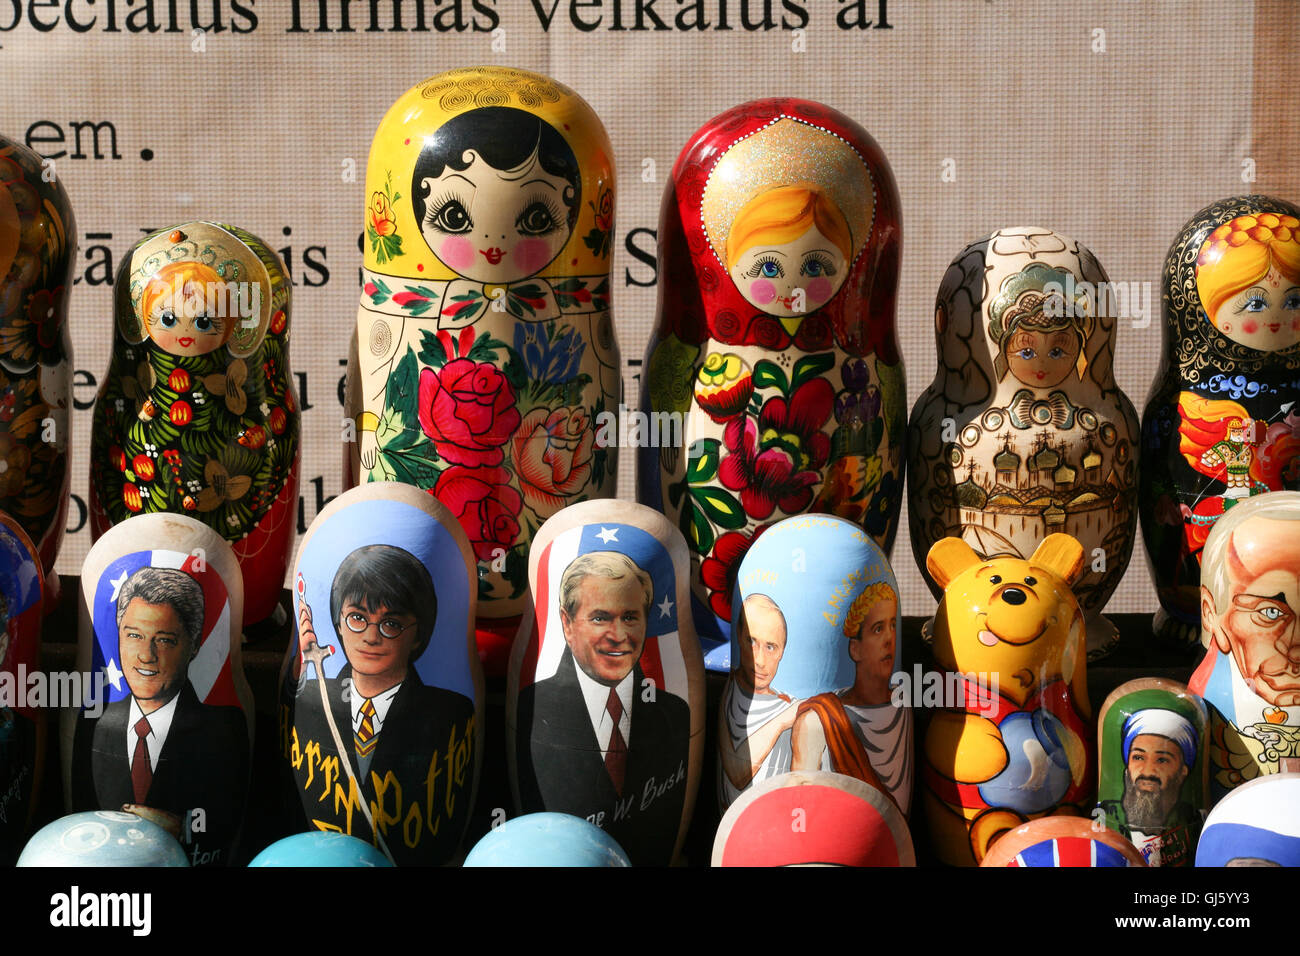 Matryoshka Doll Russian Dolls With Typical Motherly Images Along Stock Photo Alamy